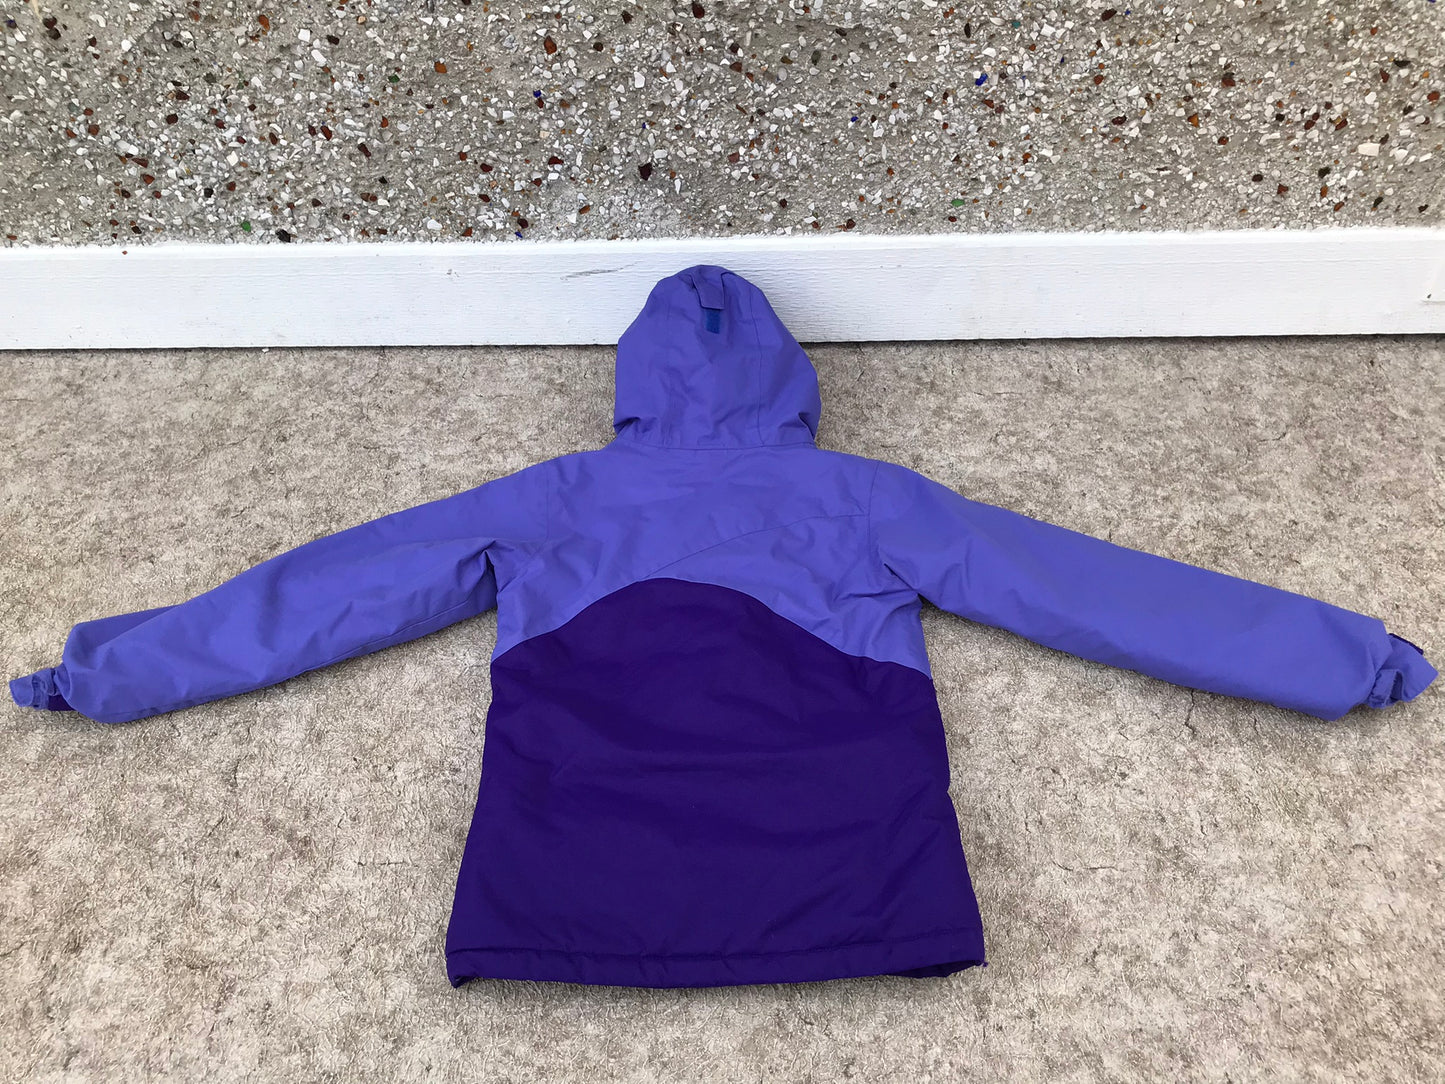 Winter Coat Child Size 10-12 Columbia Purple With Snow Belt  As New